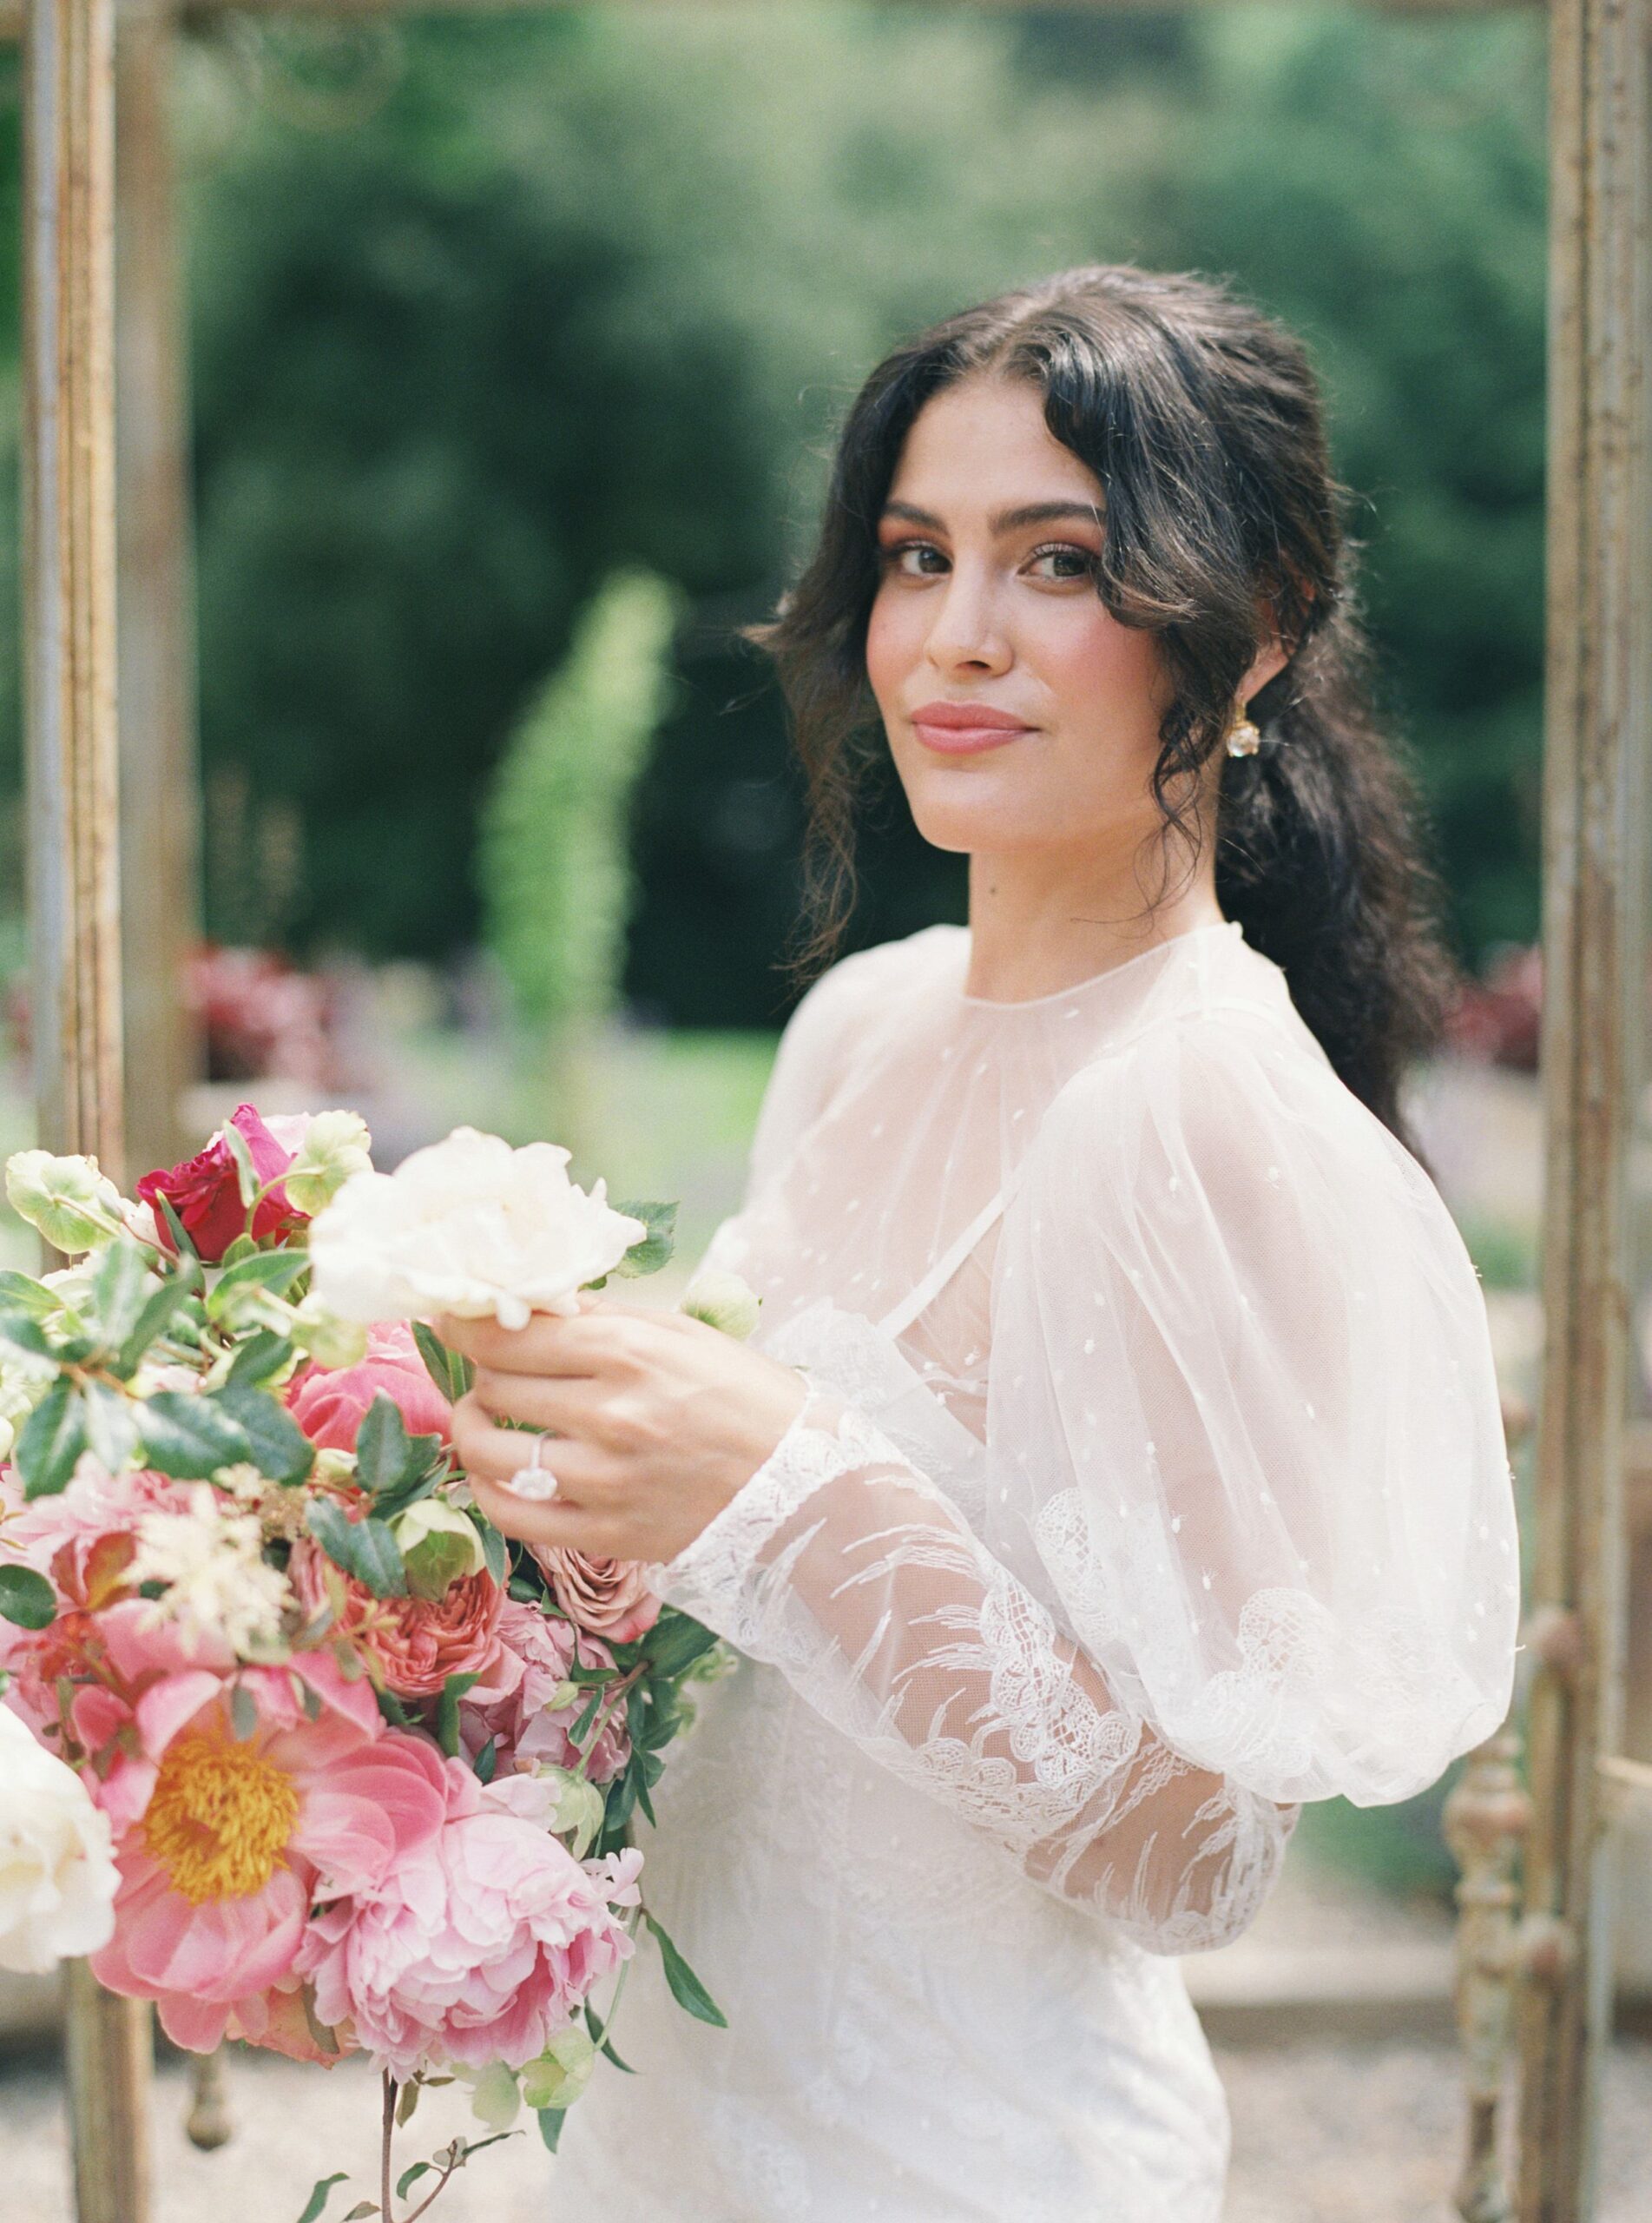 Beautiful Bride at European Inspired Greencrest Manor Wedding Venue photographed on film by destination wedding photographer Sarah Sunstrom Photography.